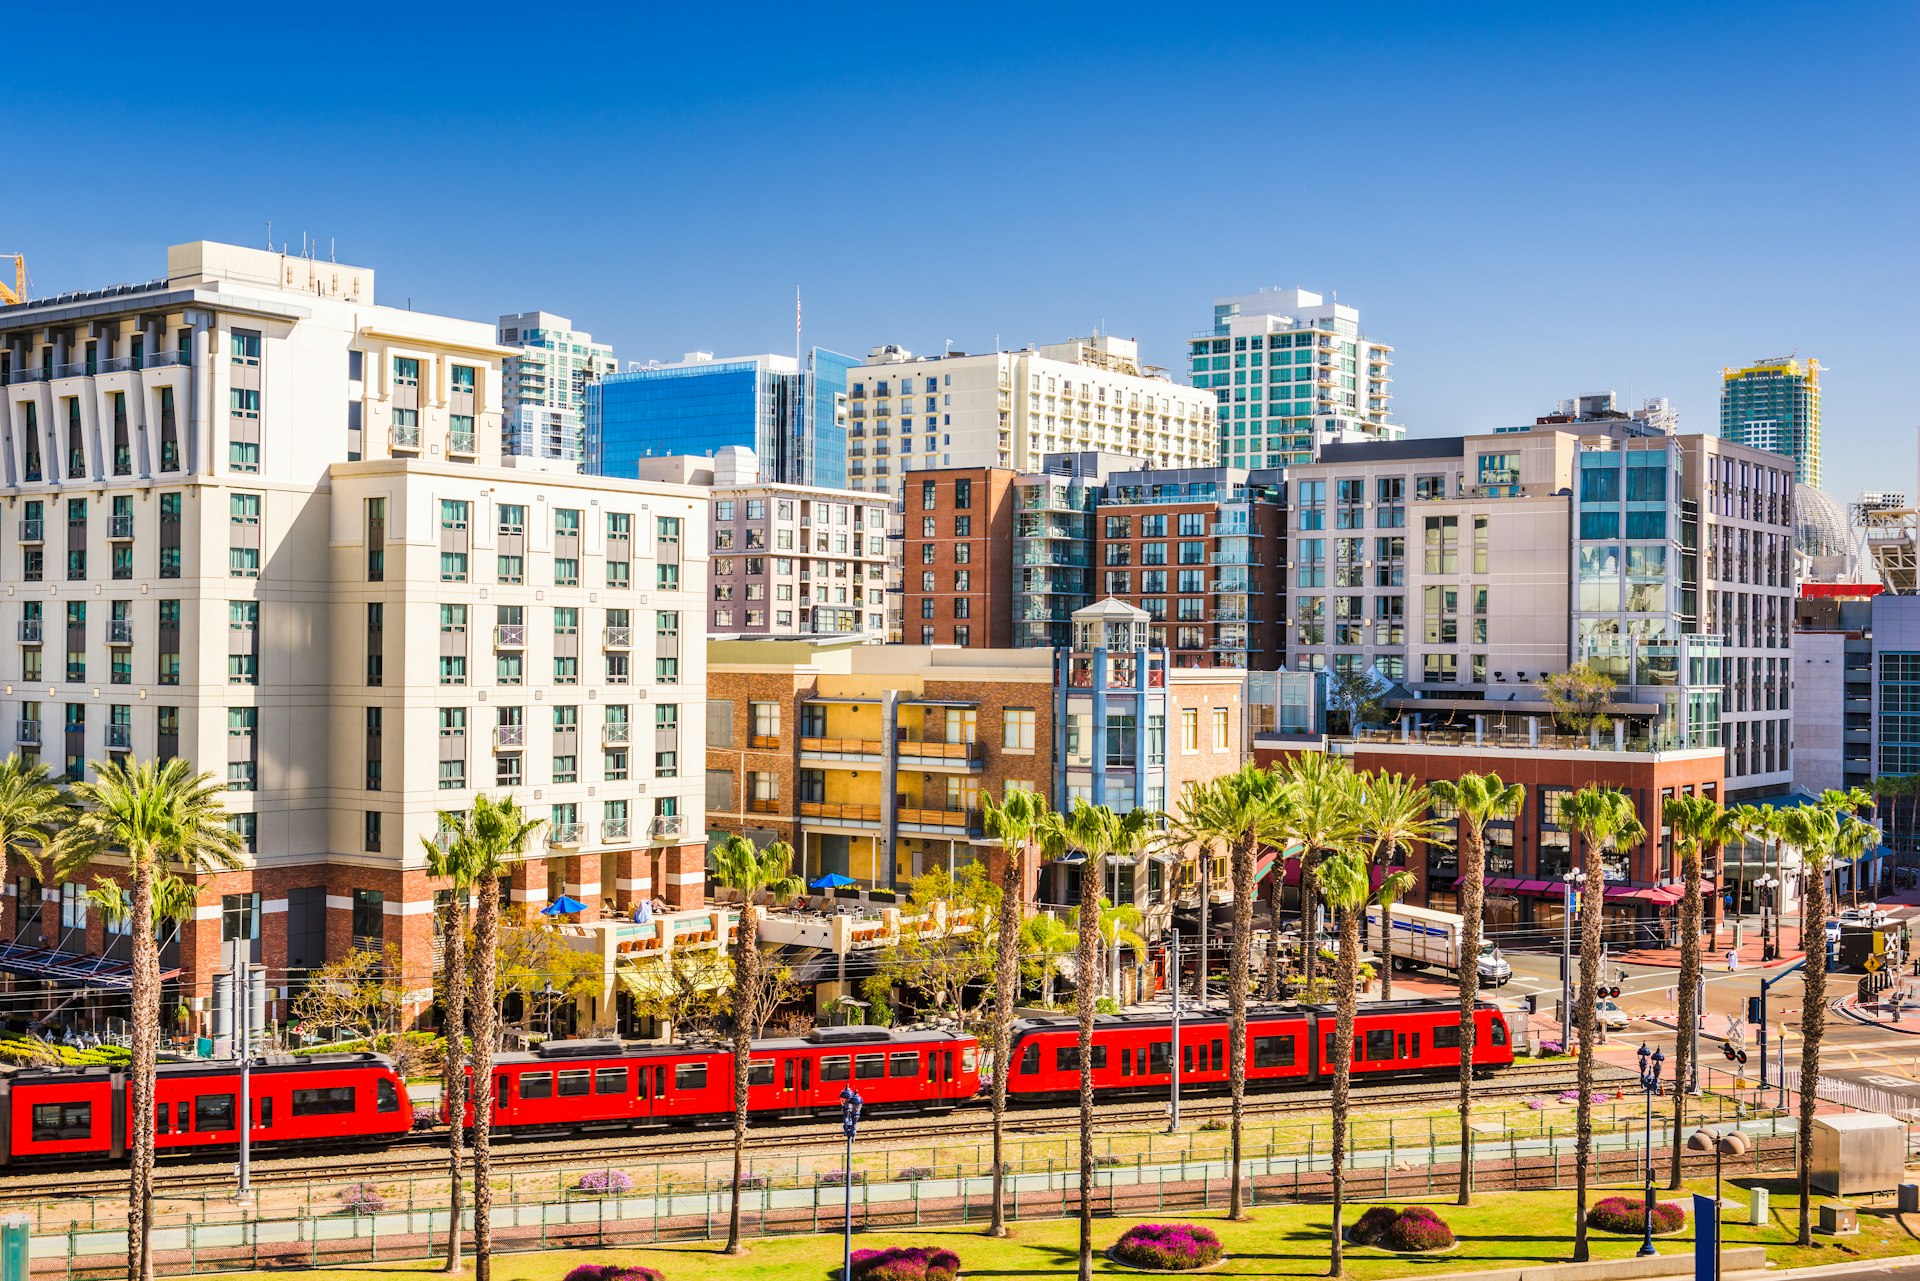 A light rail train passes by the buildings of downtown San Diego, California, USA